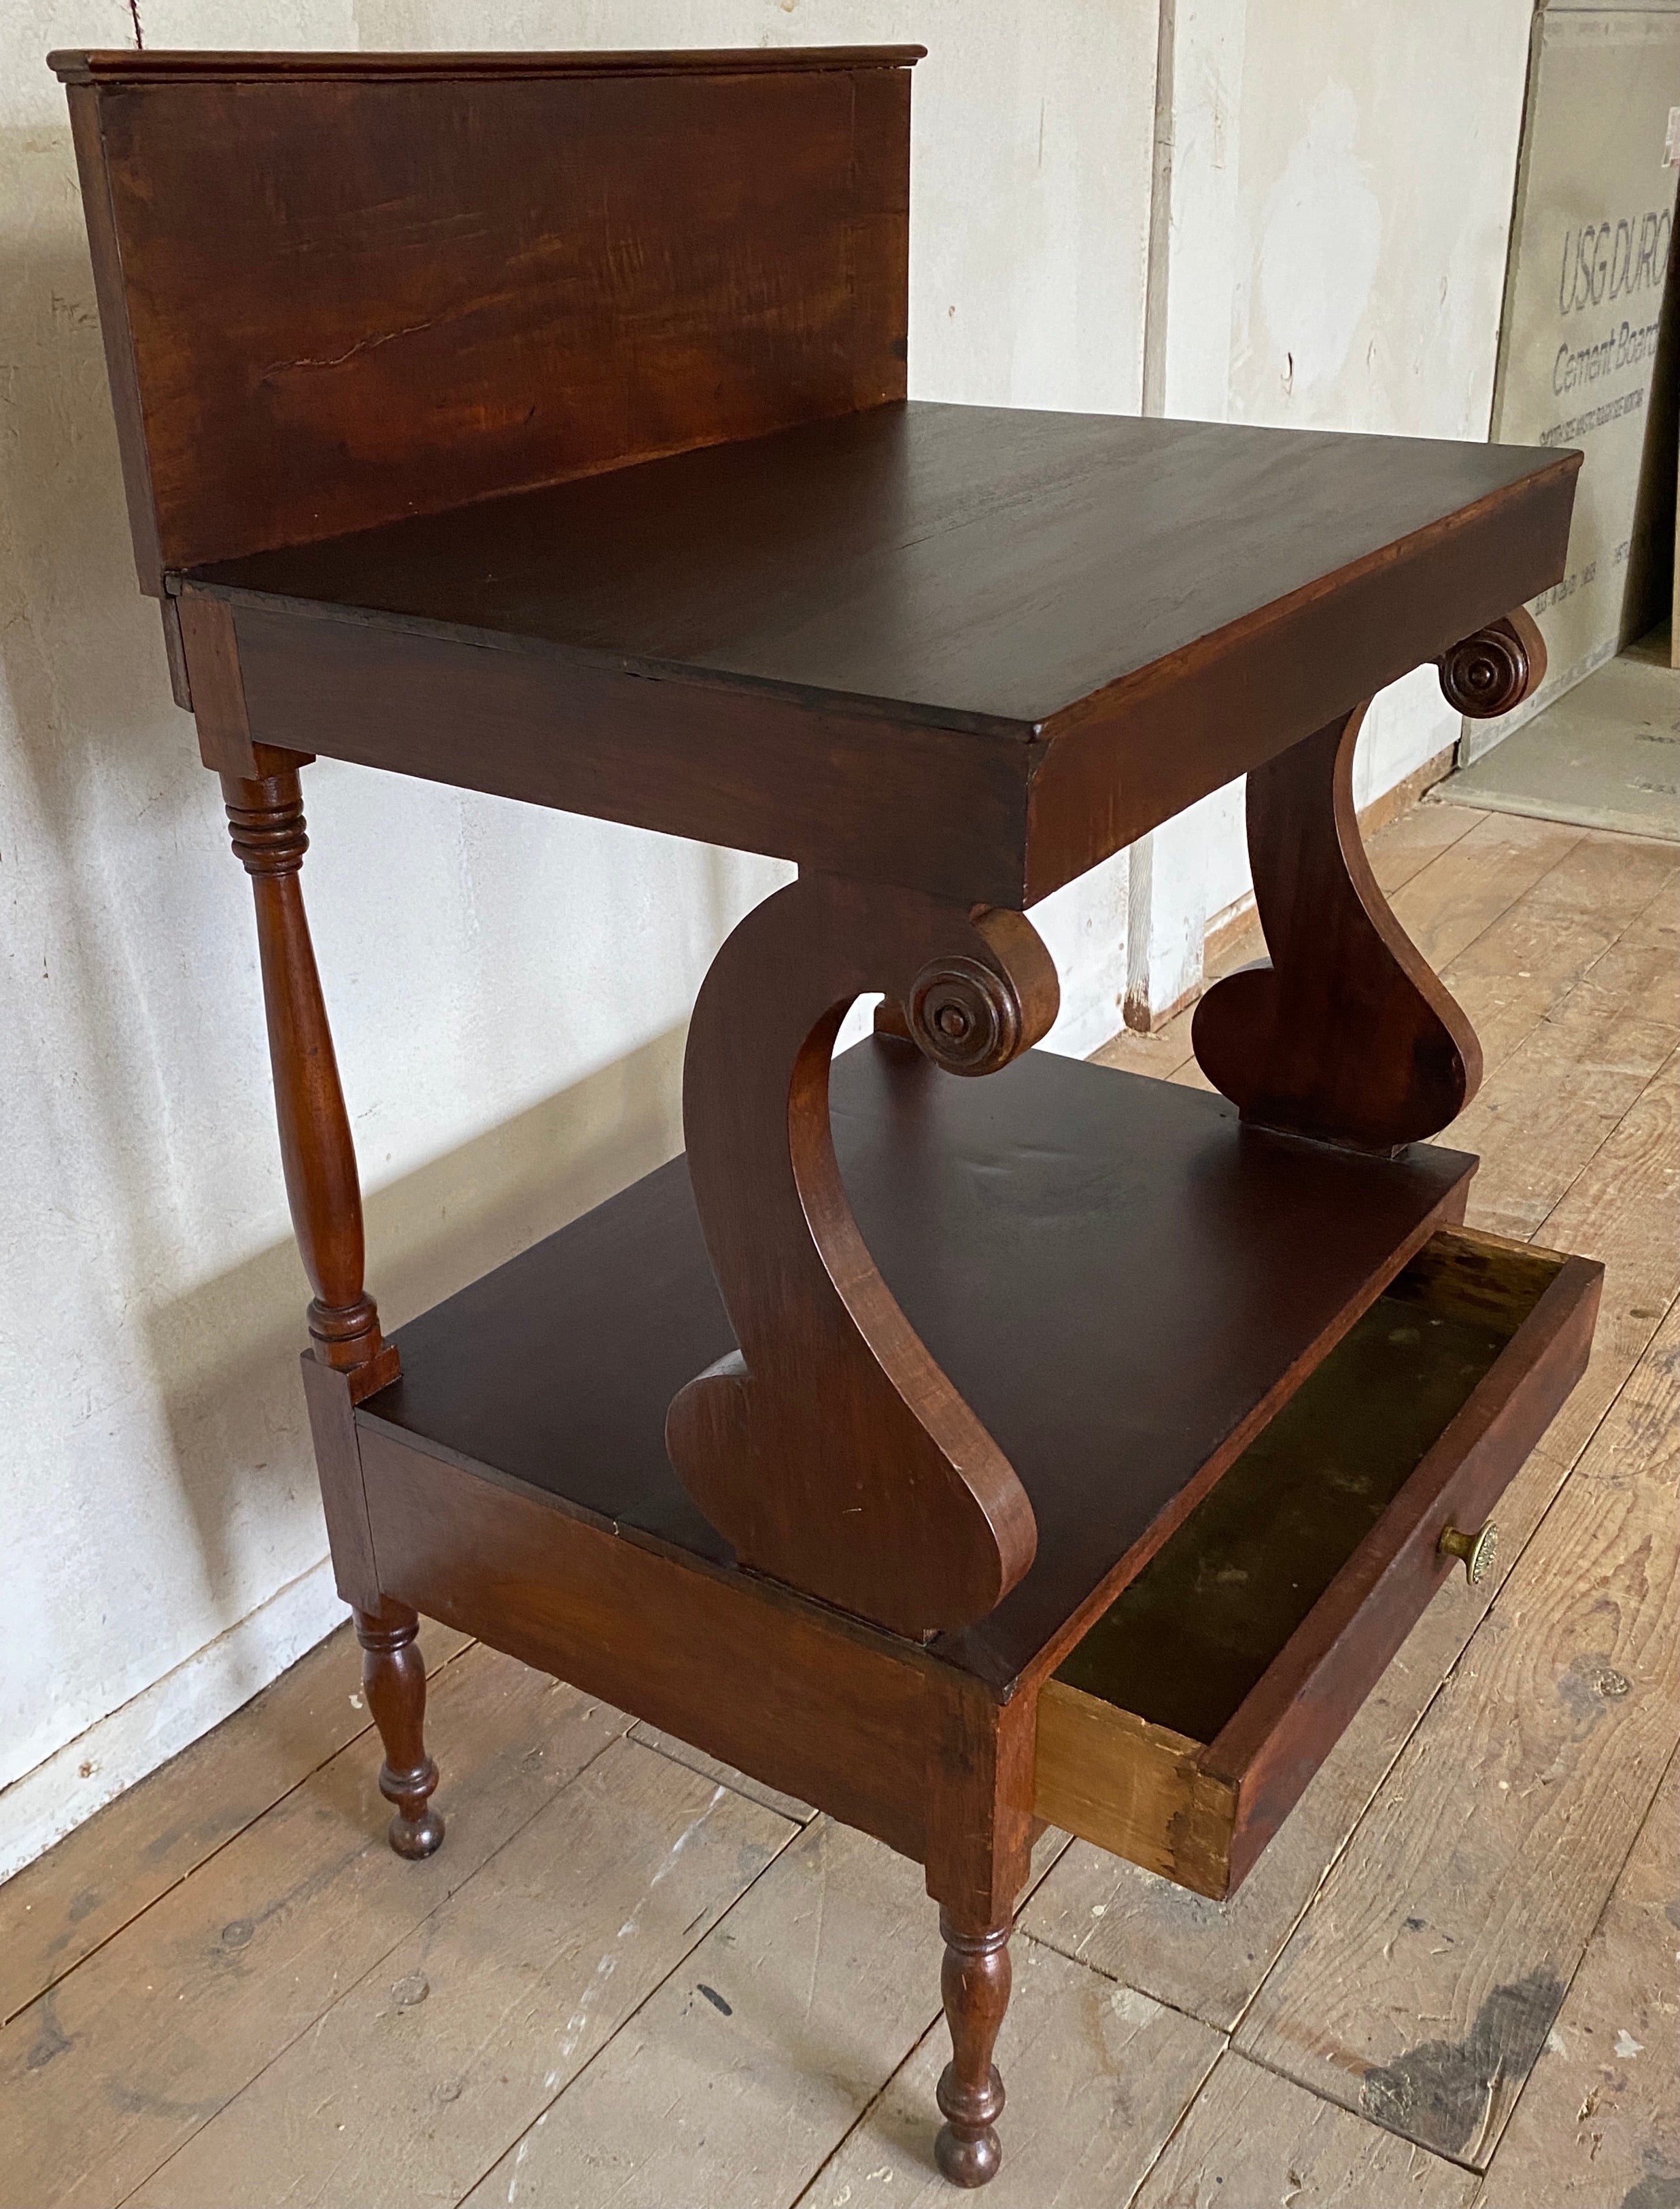 19th century two tier washstand with rectangular shaped backsplash and single drawer below.
Stand height w/out back splash = 28.25.
Top: 15.75 d to backsplash/13